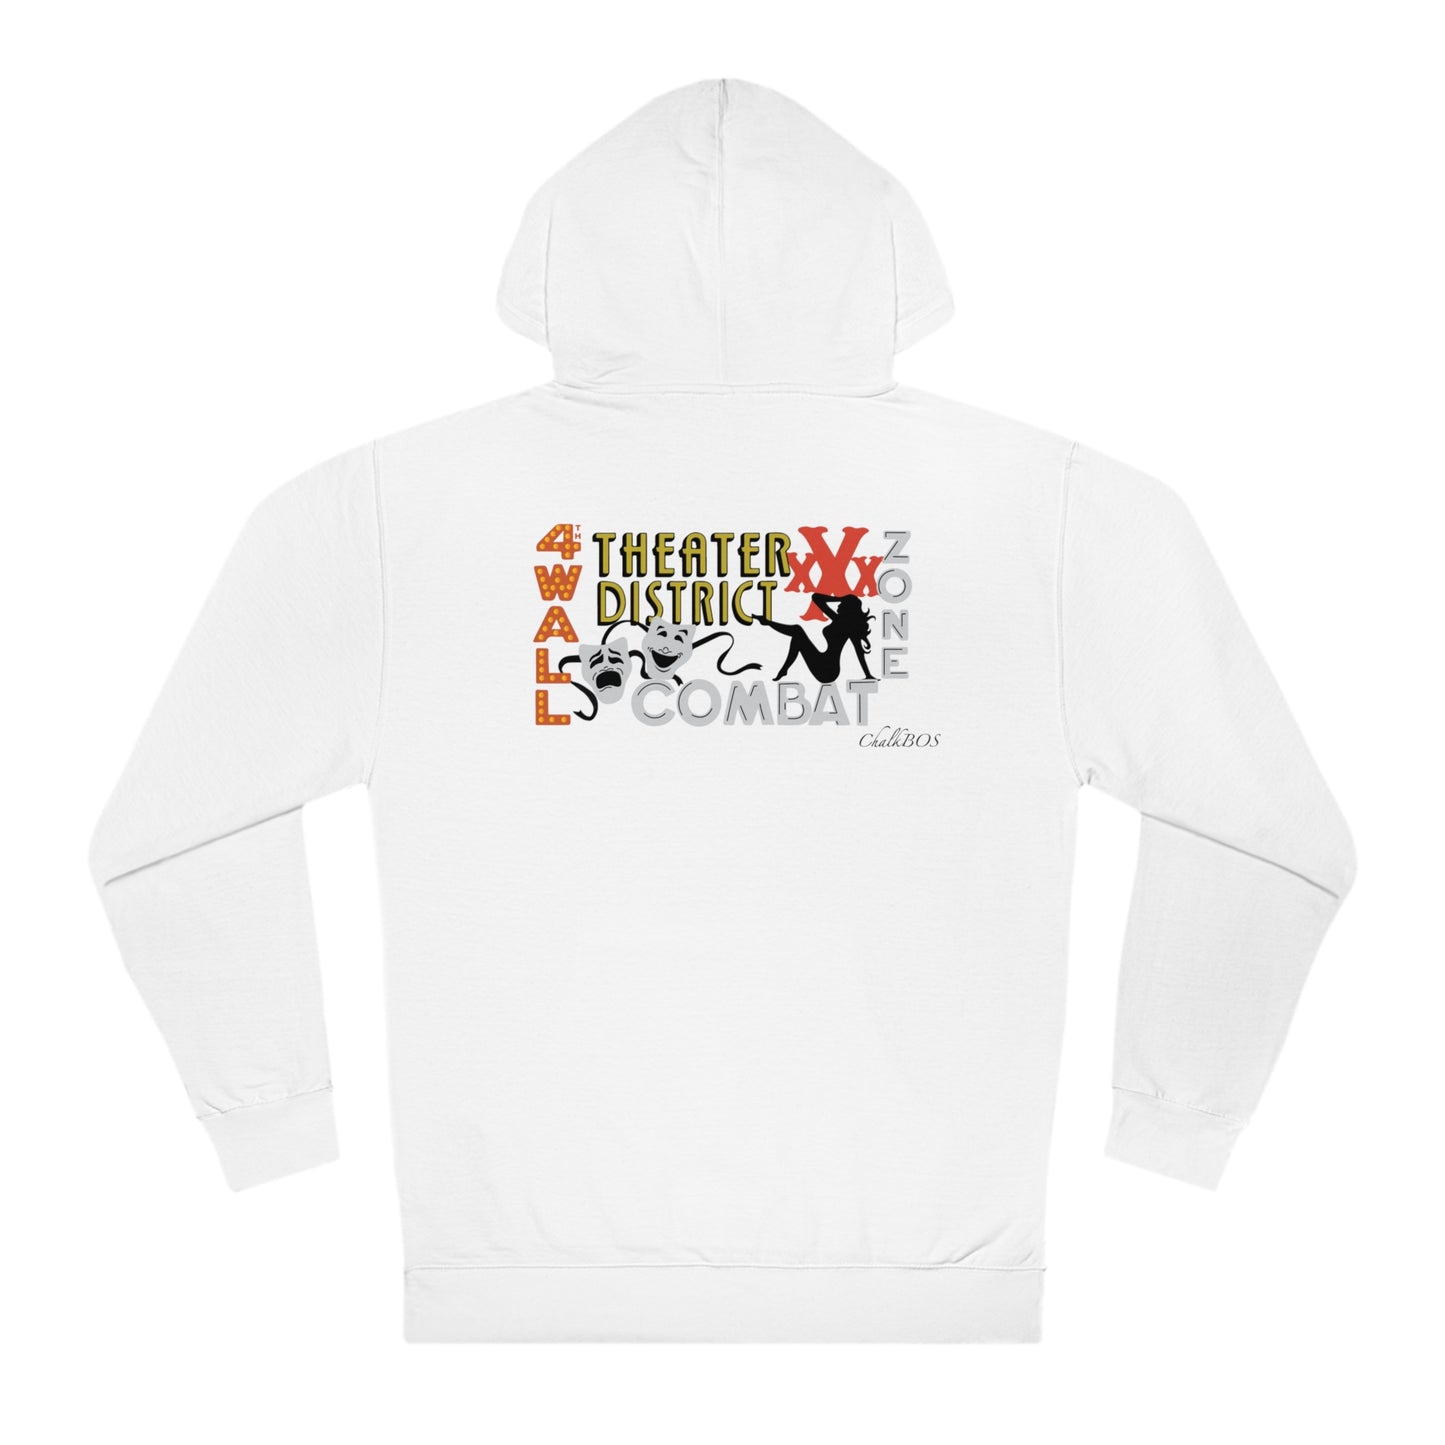 4th Wall Theater District Unisex Hooded Sweatshirt